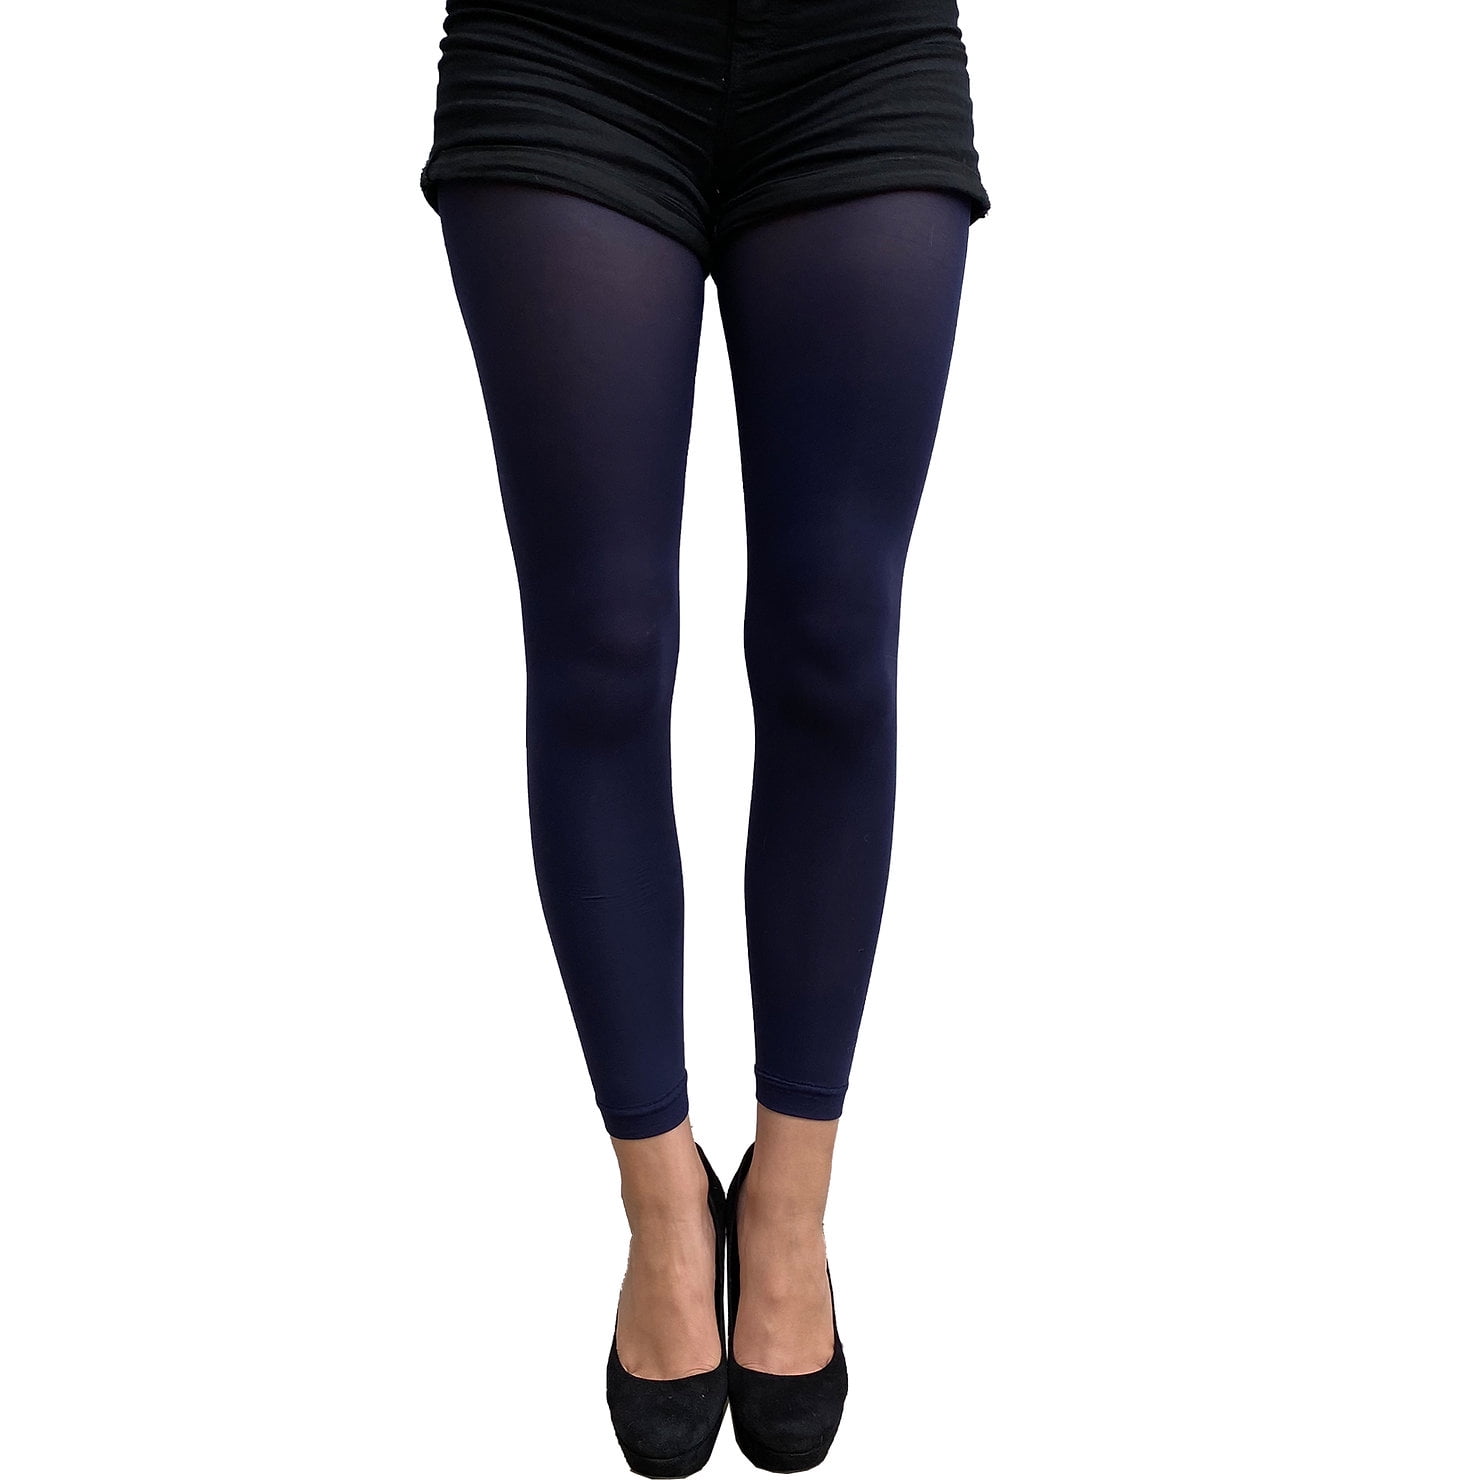 Navy Blue Opaque Footless Tights for Women 